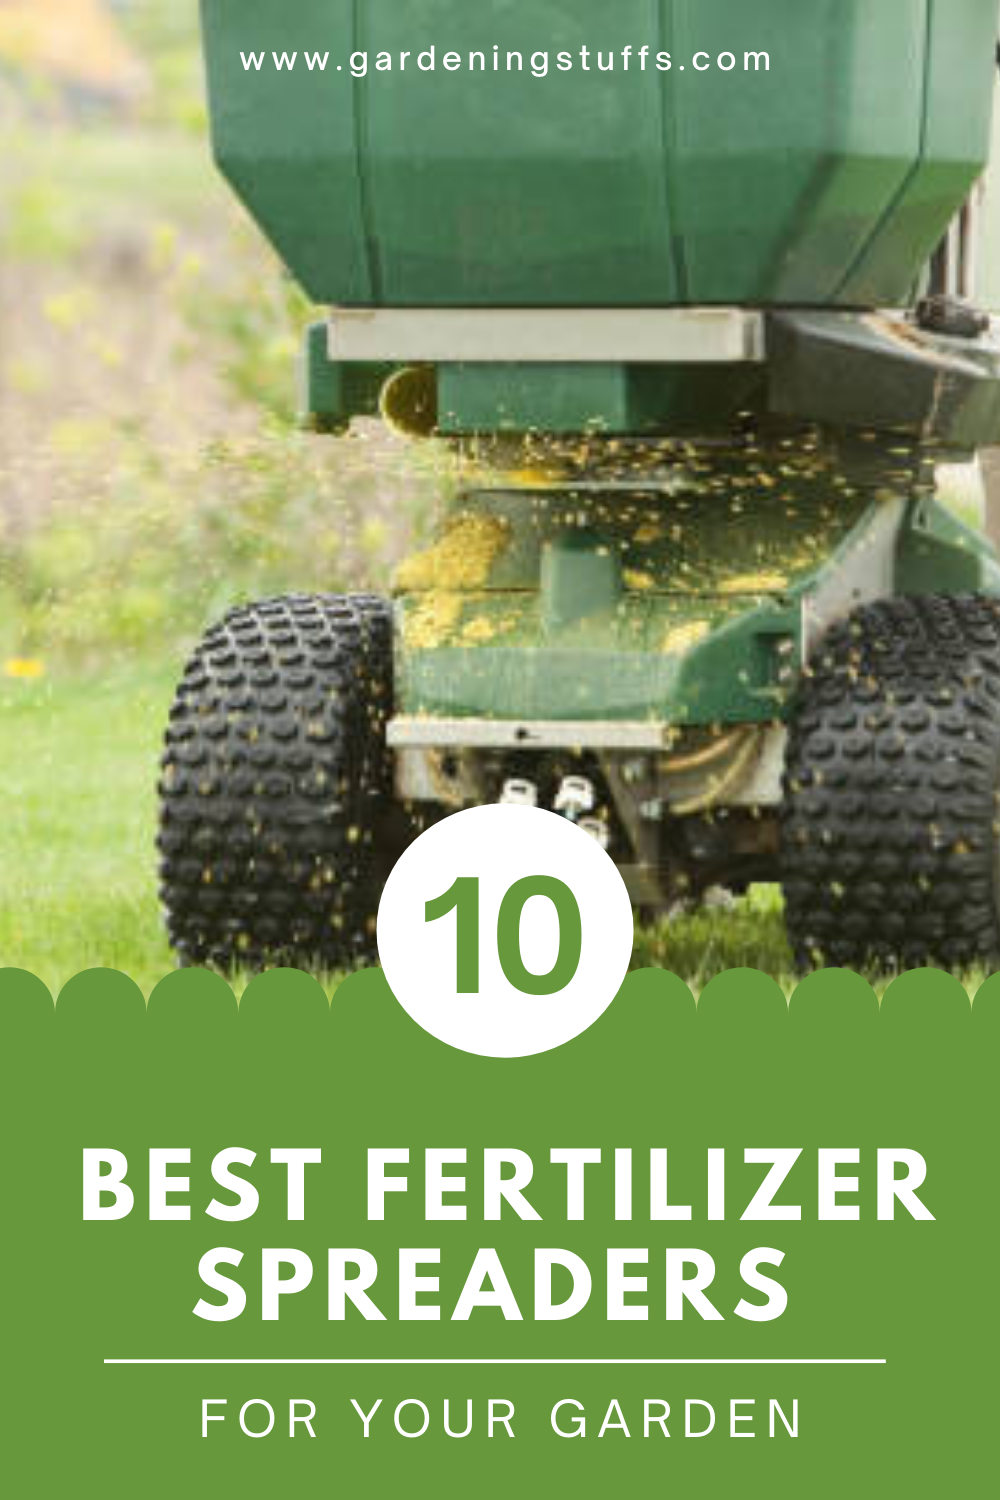 Do you wish to have a flourishing garden? Then you know you need fertilizers to power up your plants. Check out our review and buying guide of the best fertilizer spreaders to help you identify the ones that are suitable for your needs.